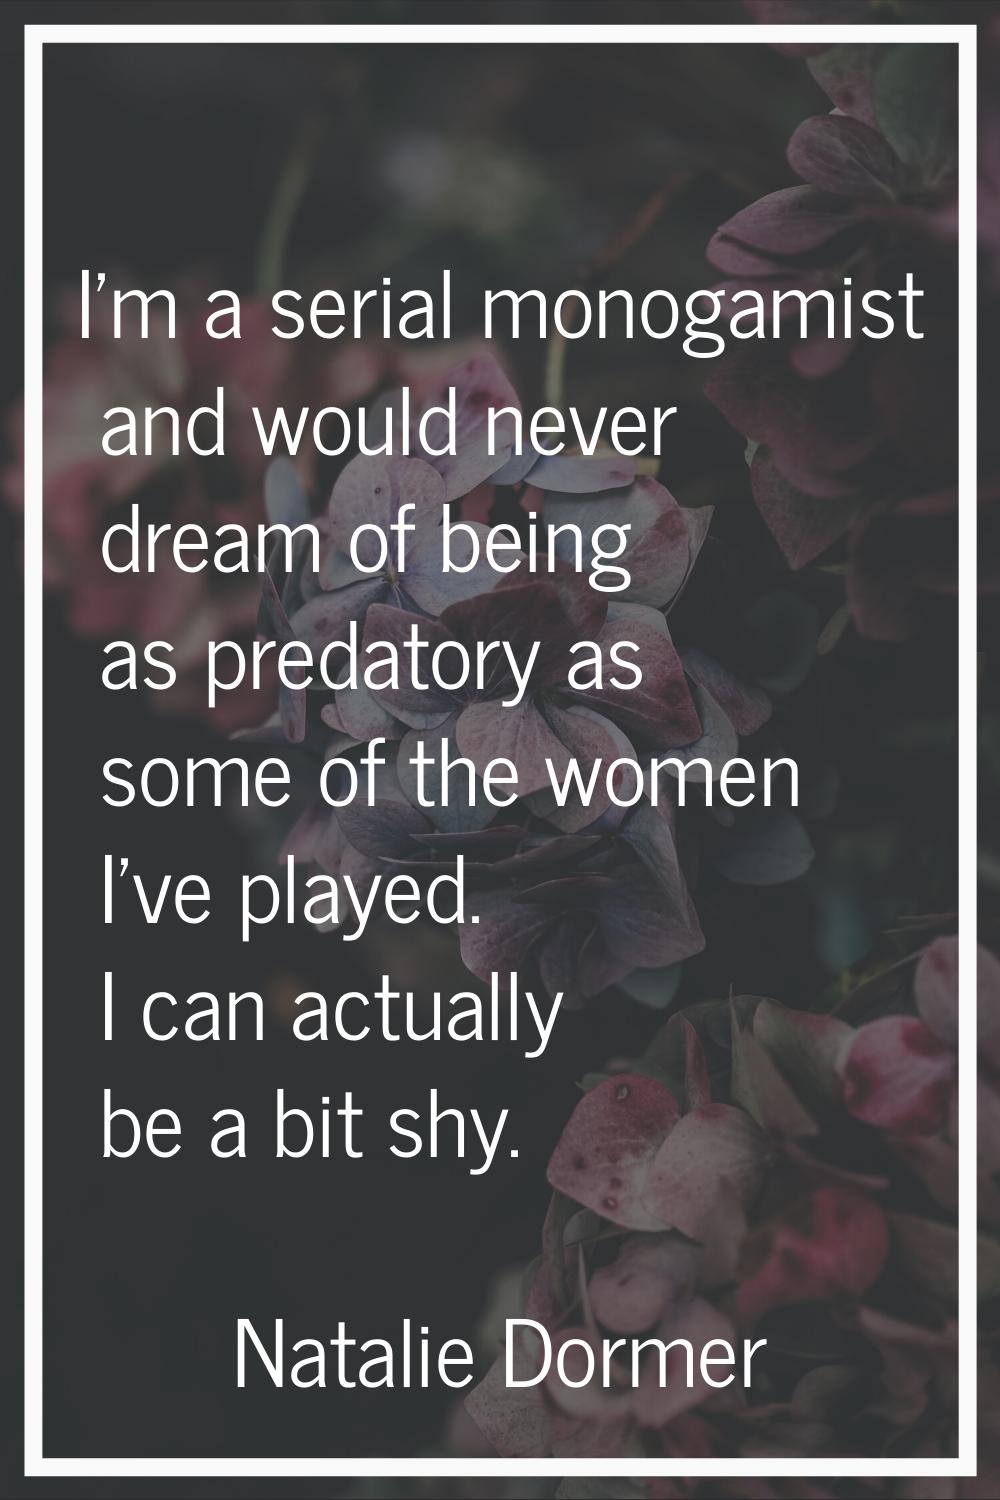 I'm a serial monogamist and would never dream of being as predatory as some of the women I've playe